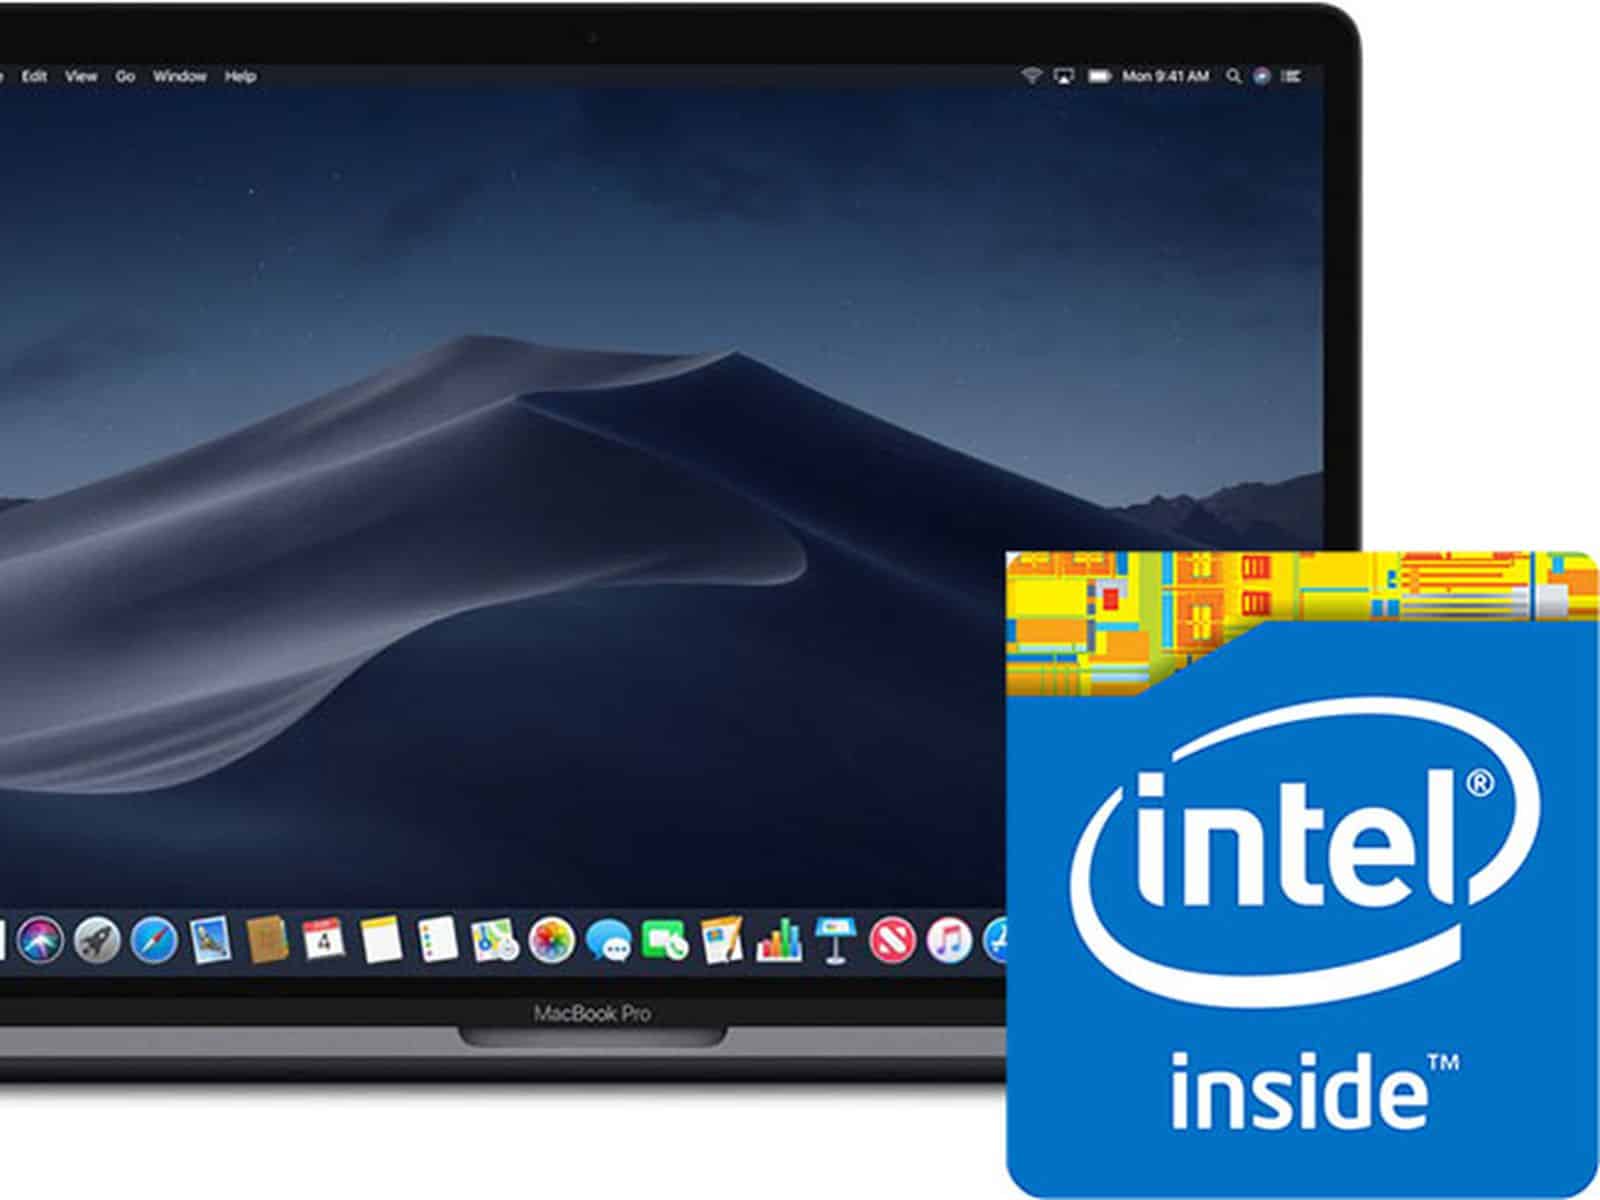 Apple will continue to support Intel Macs